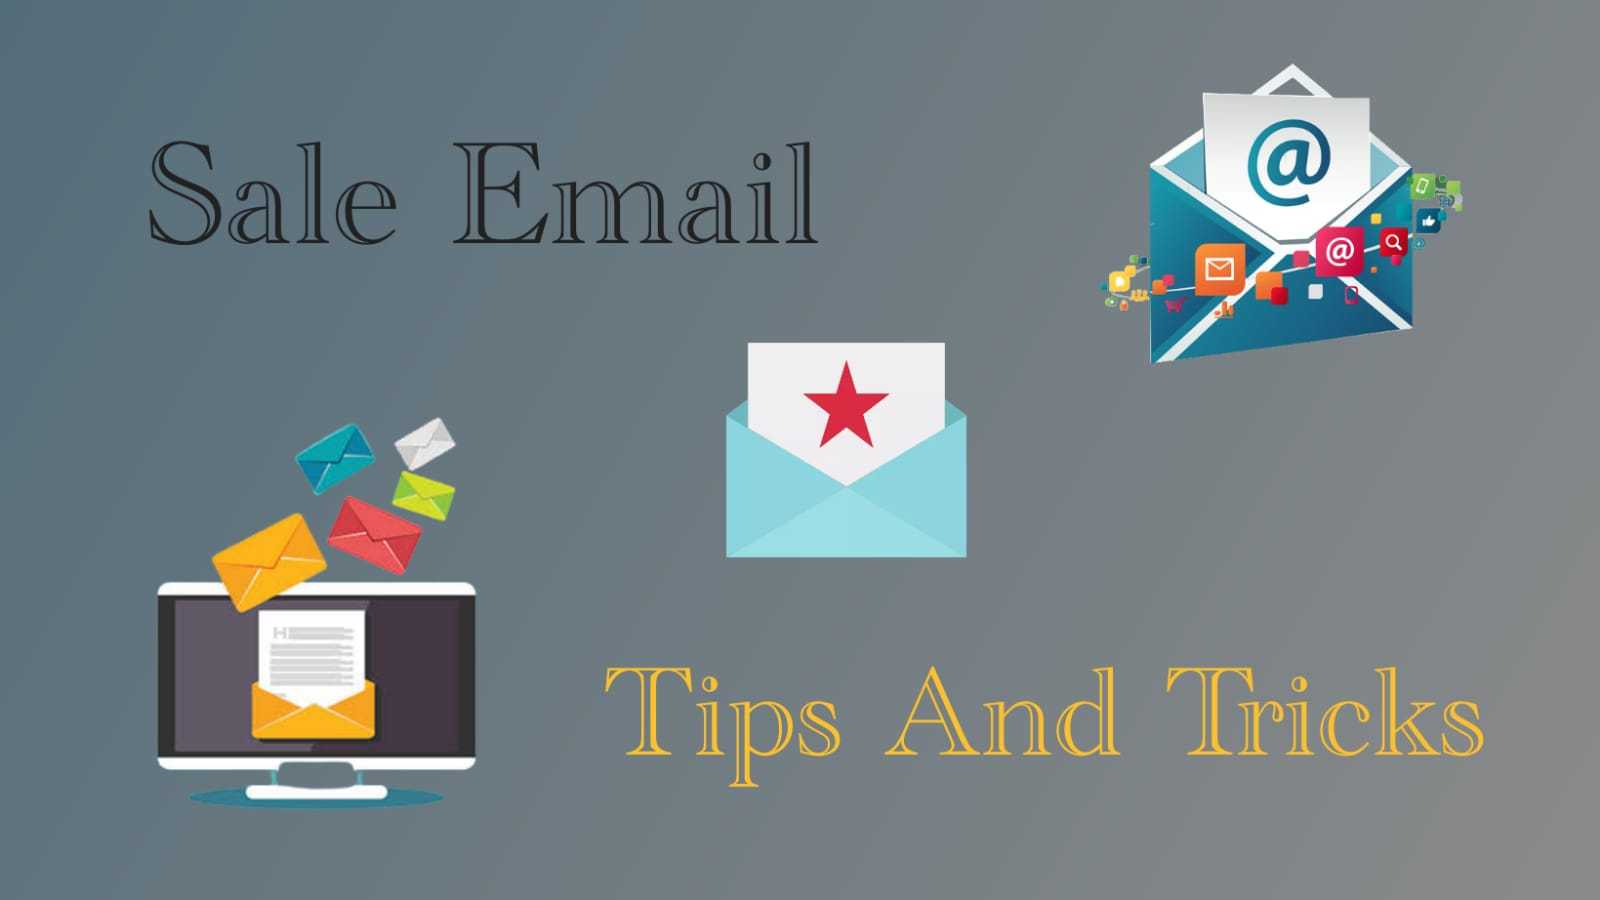 Sales Email Tips And Tricks